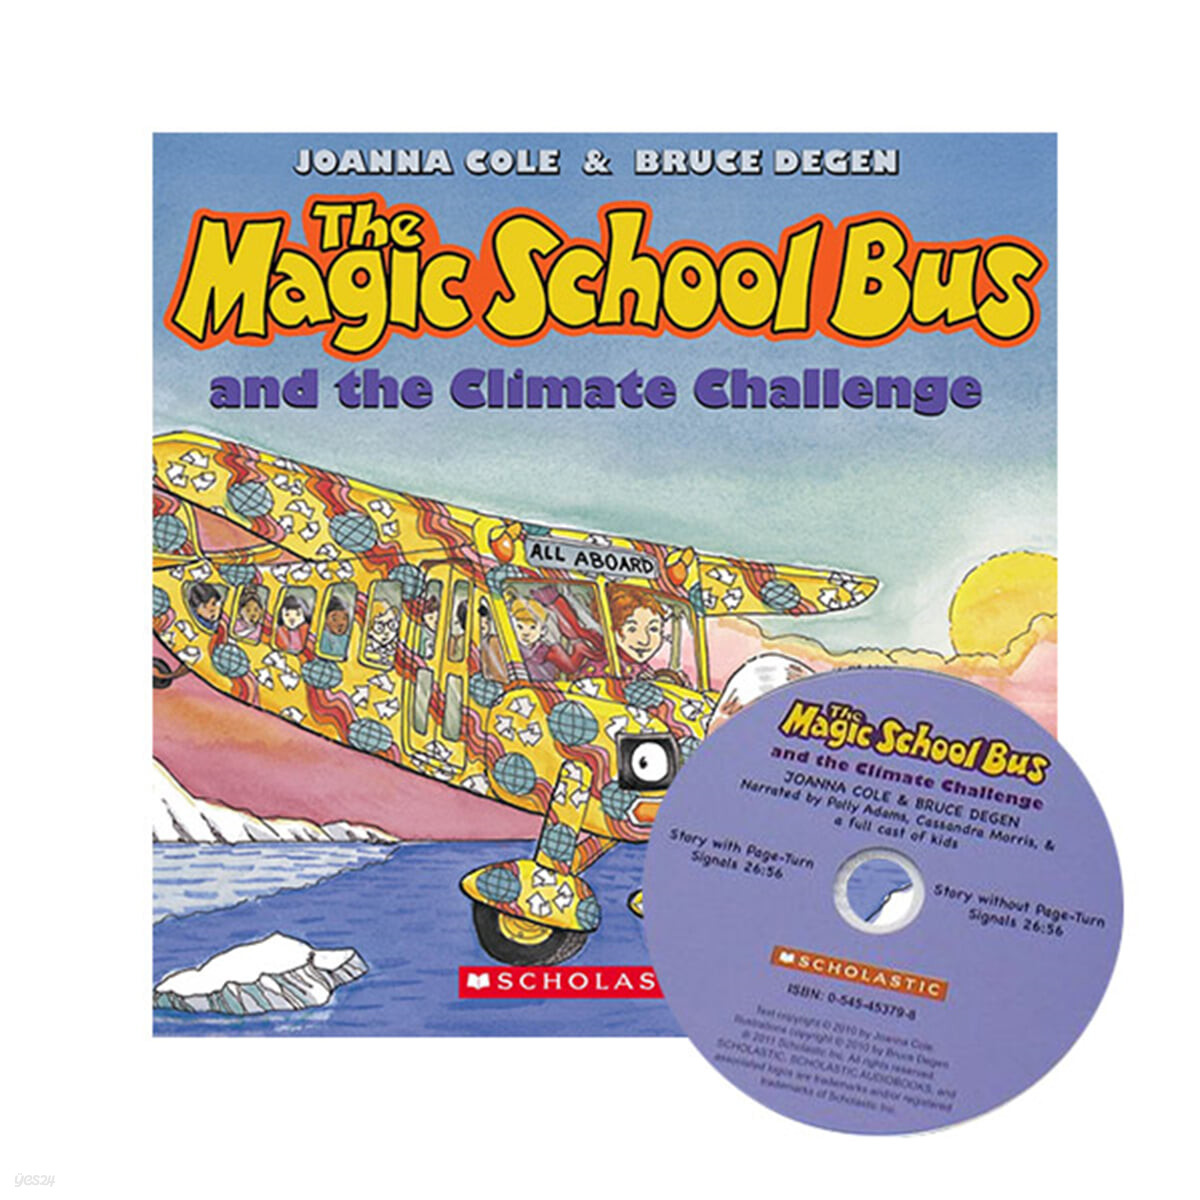 (The)magic school bus and the climate challenge